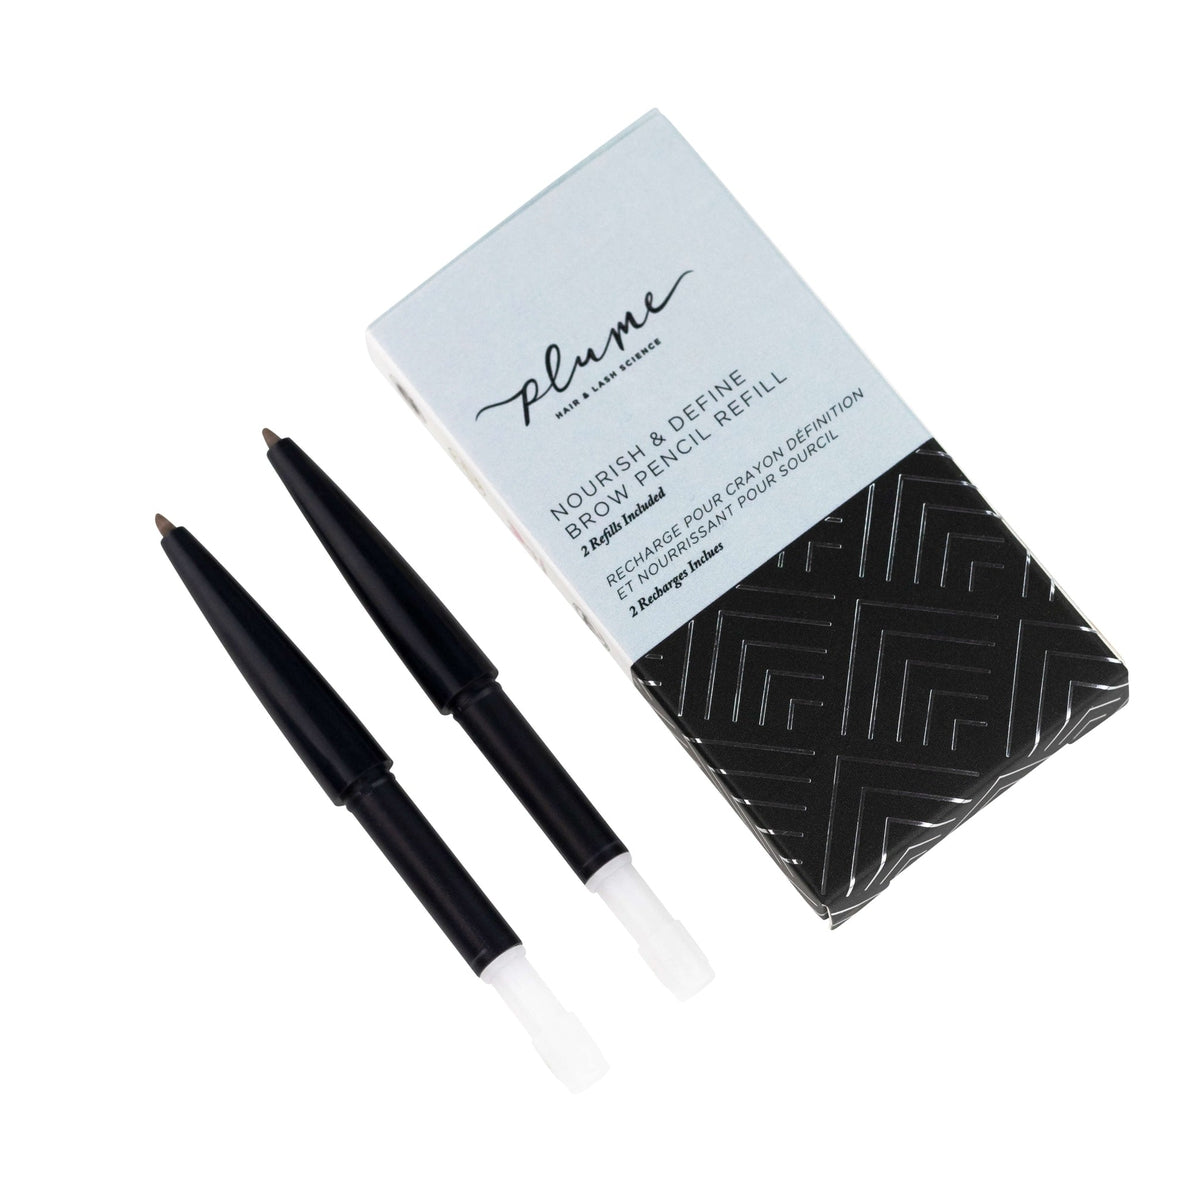 Plume Nourish and Define Brow Pencil Refills (2 pack) The Detox Market pic